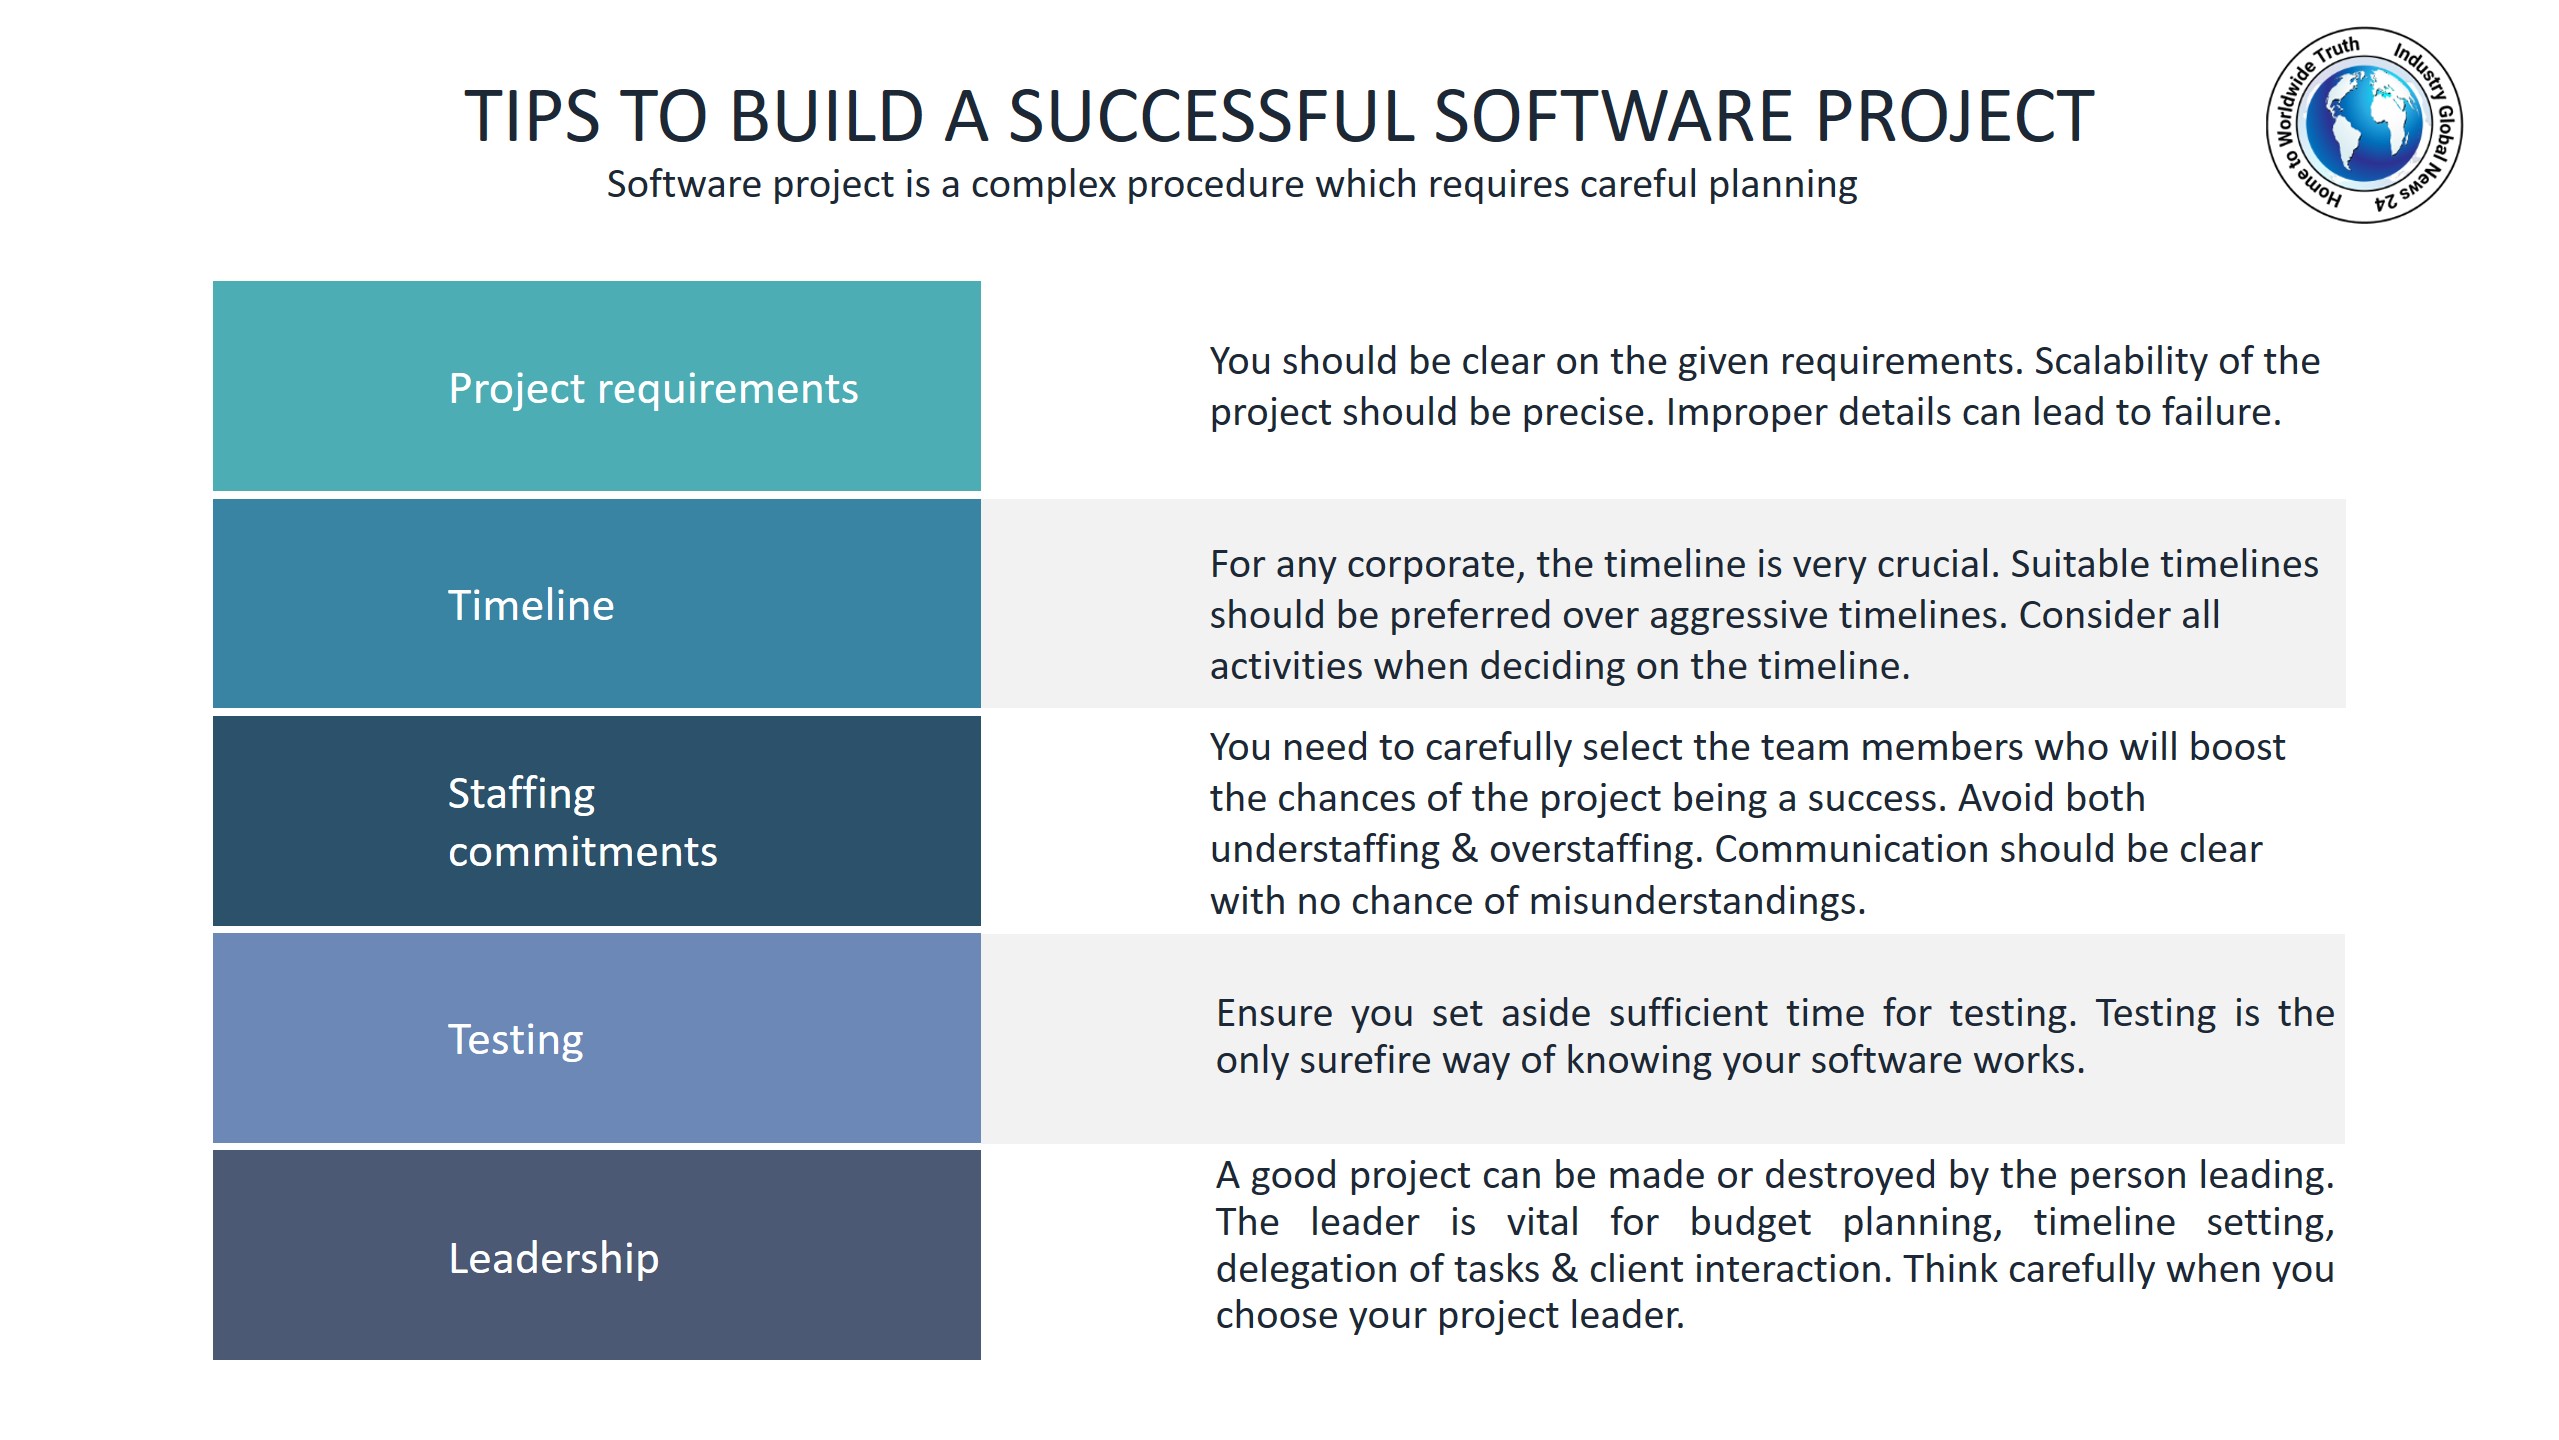 Tips to build a successful software project